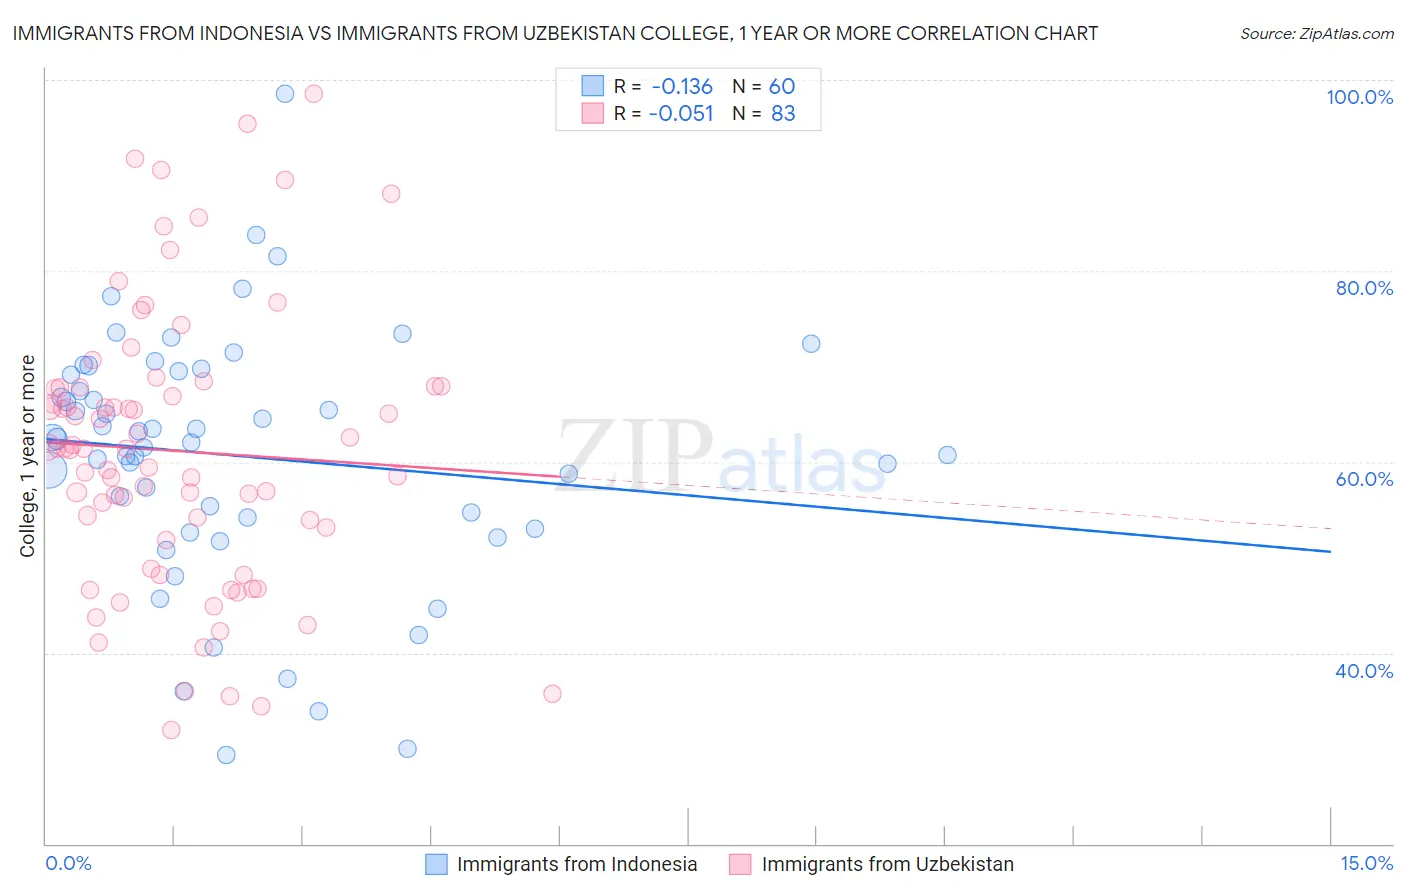 Immigrants from Indonesia vs Immigrants from Uzbekistan College, 1 year or more